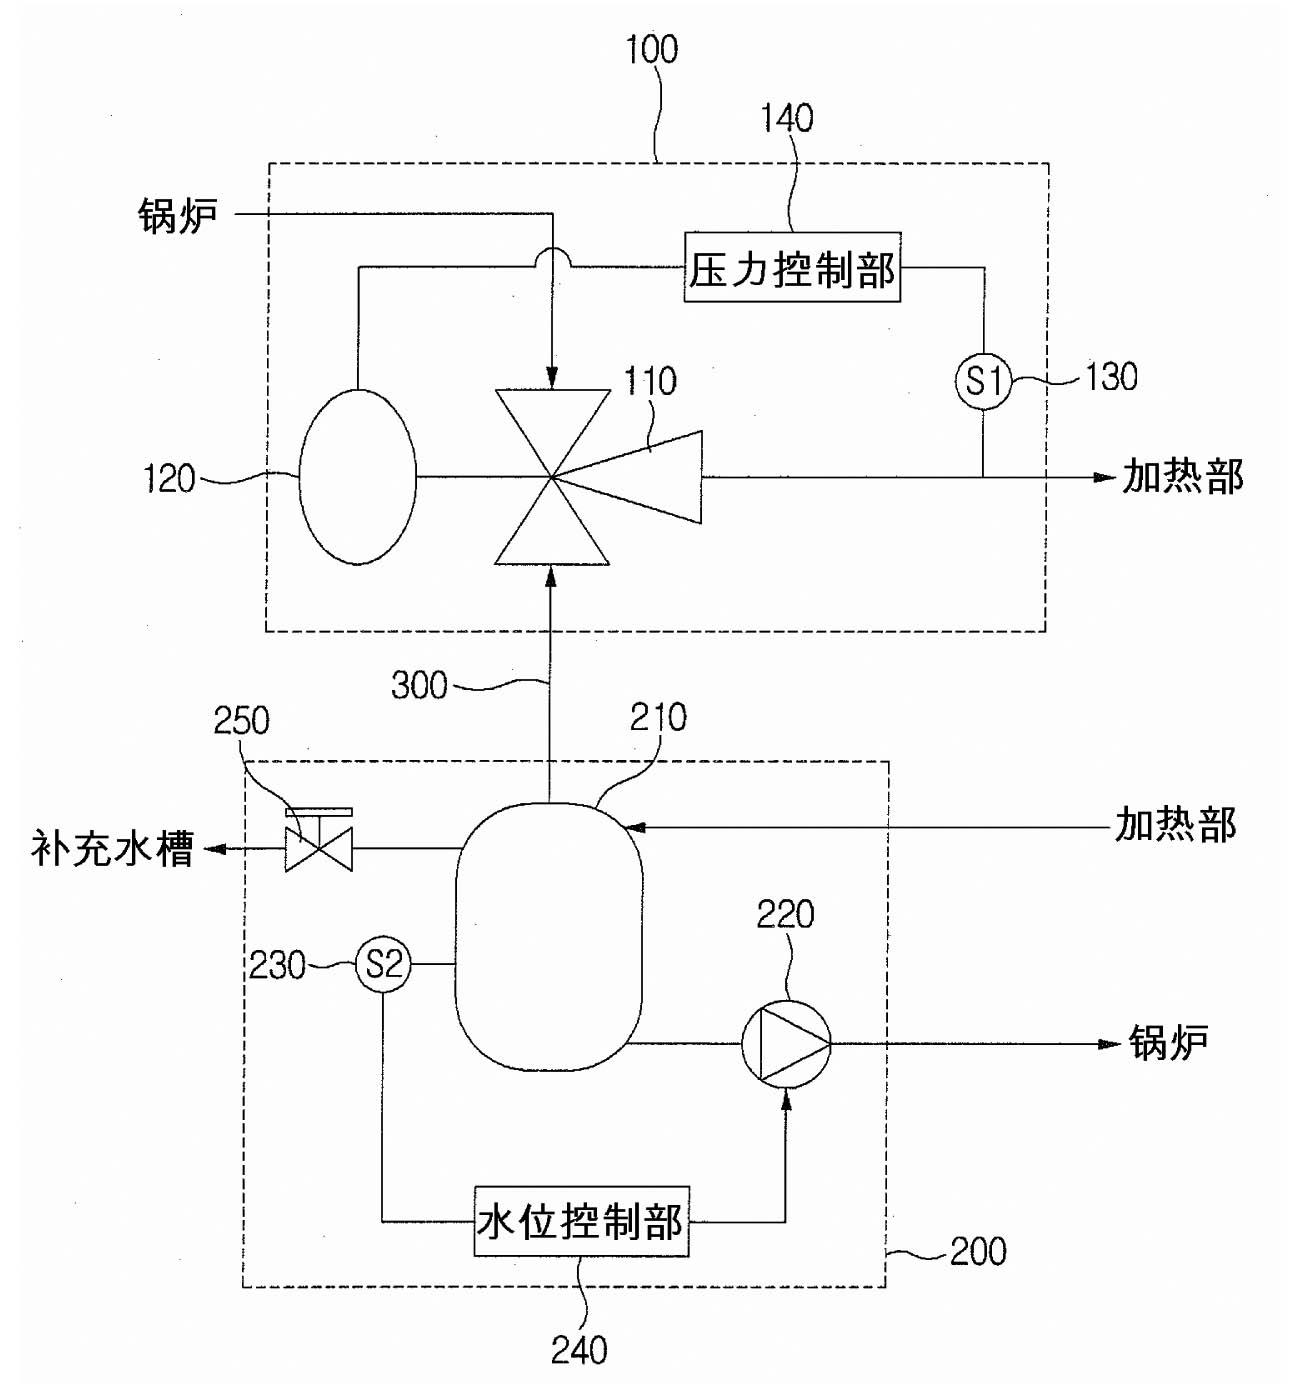 Apparatus for recovering vent steam and drain